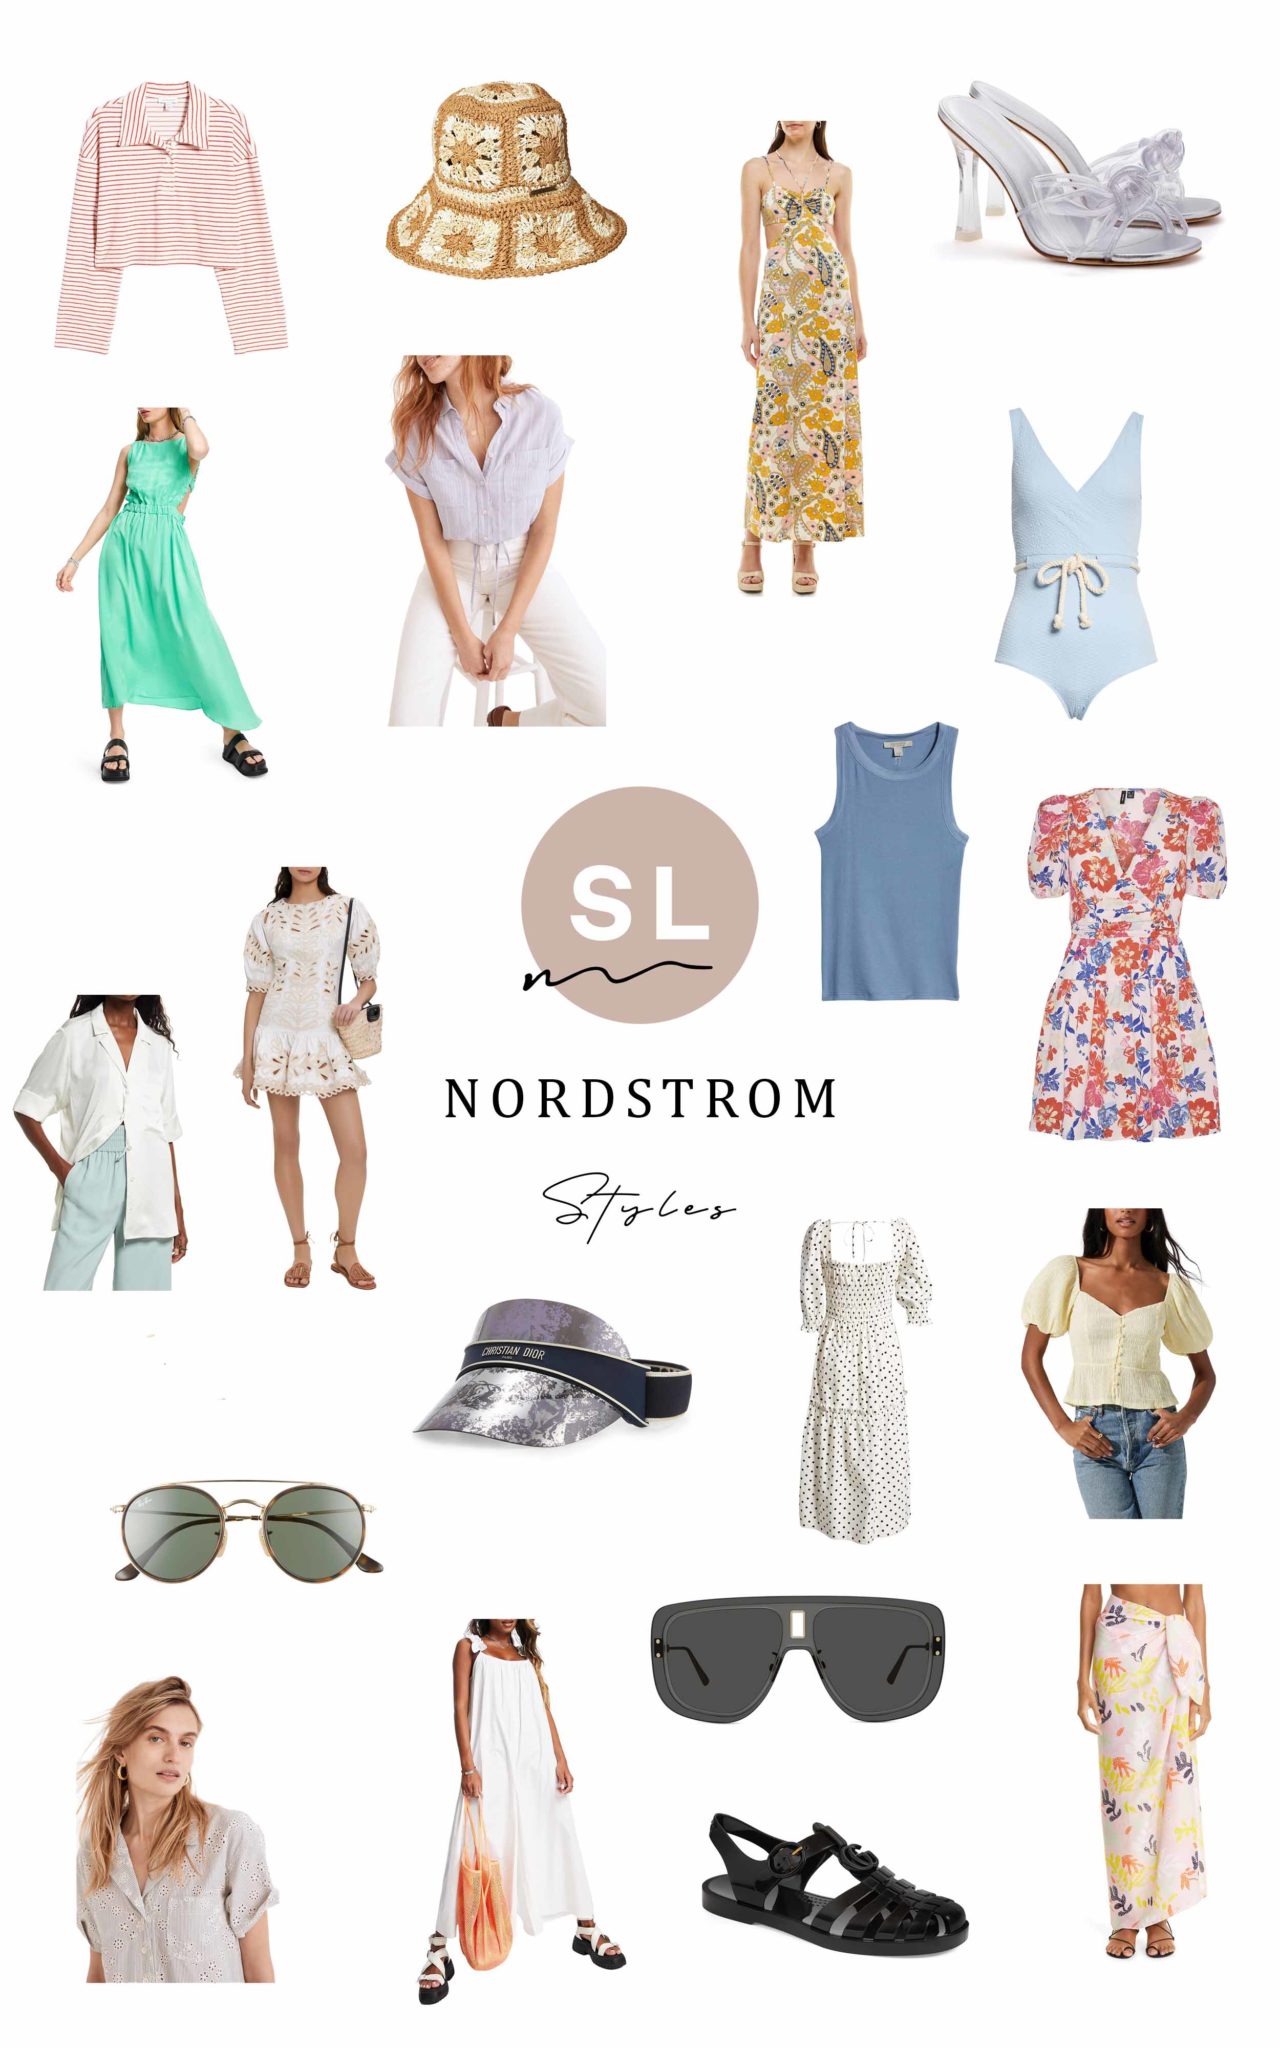 New from Nordstrom for Summer